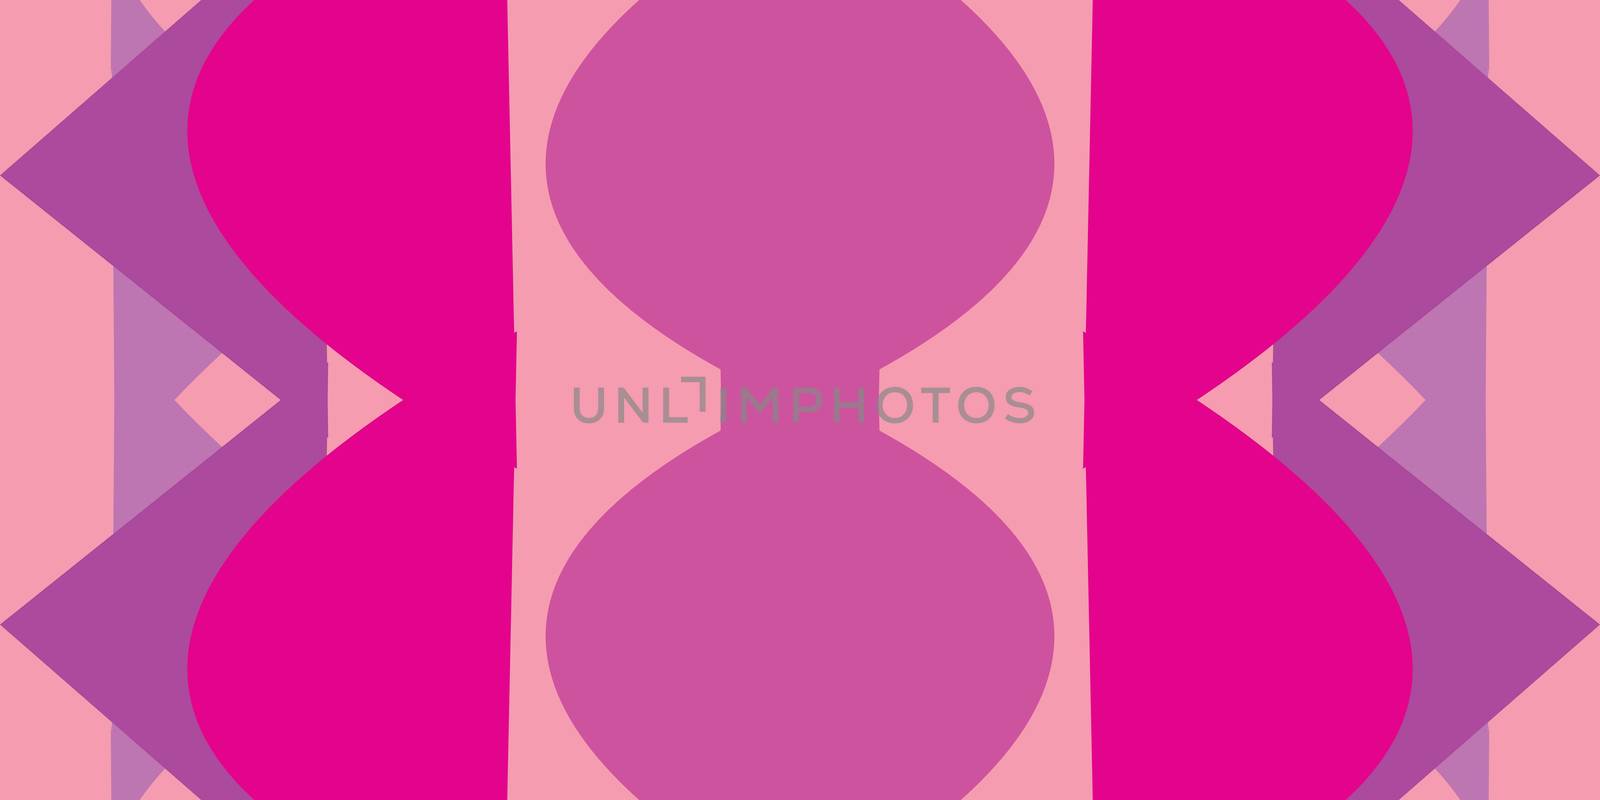 Abstract pink hourglass shapes in seamless background pattern